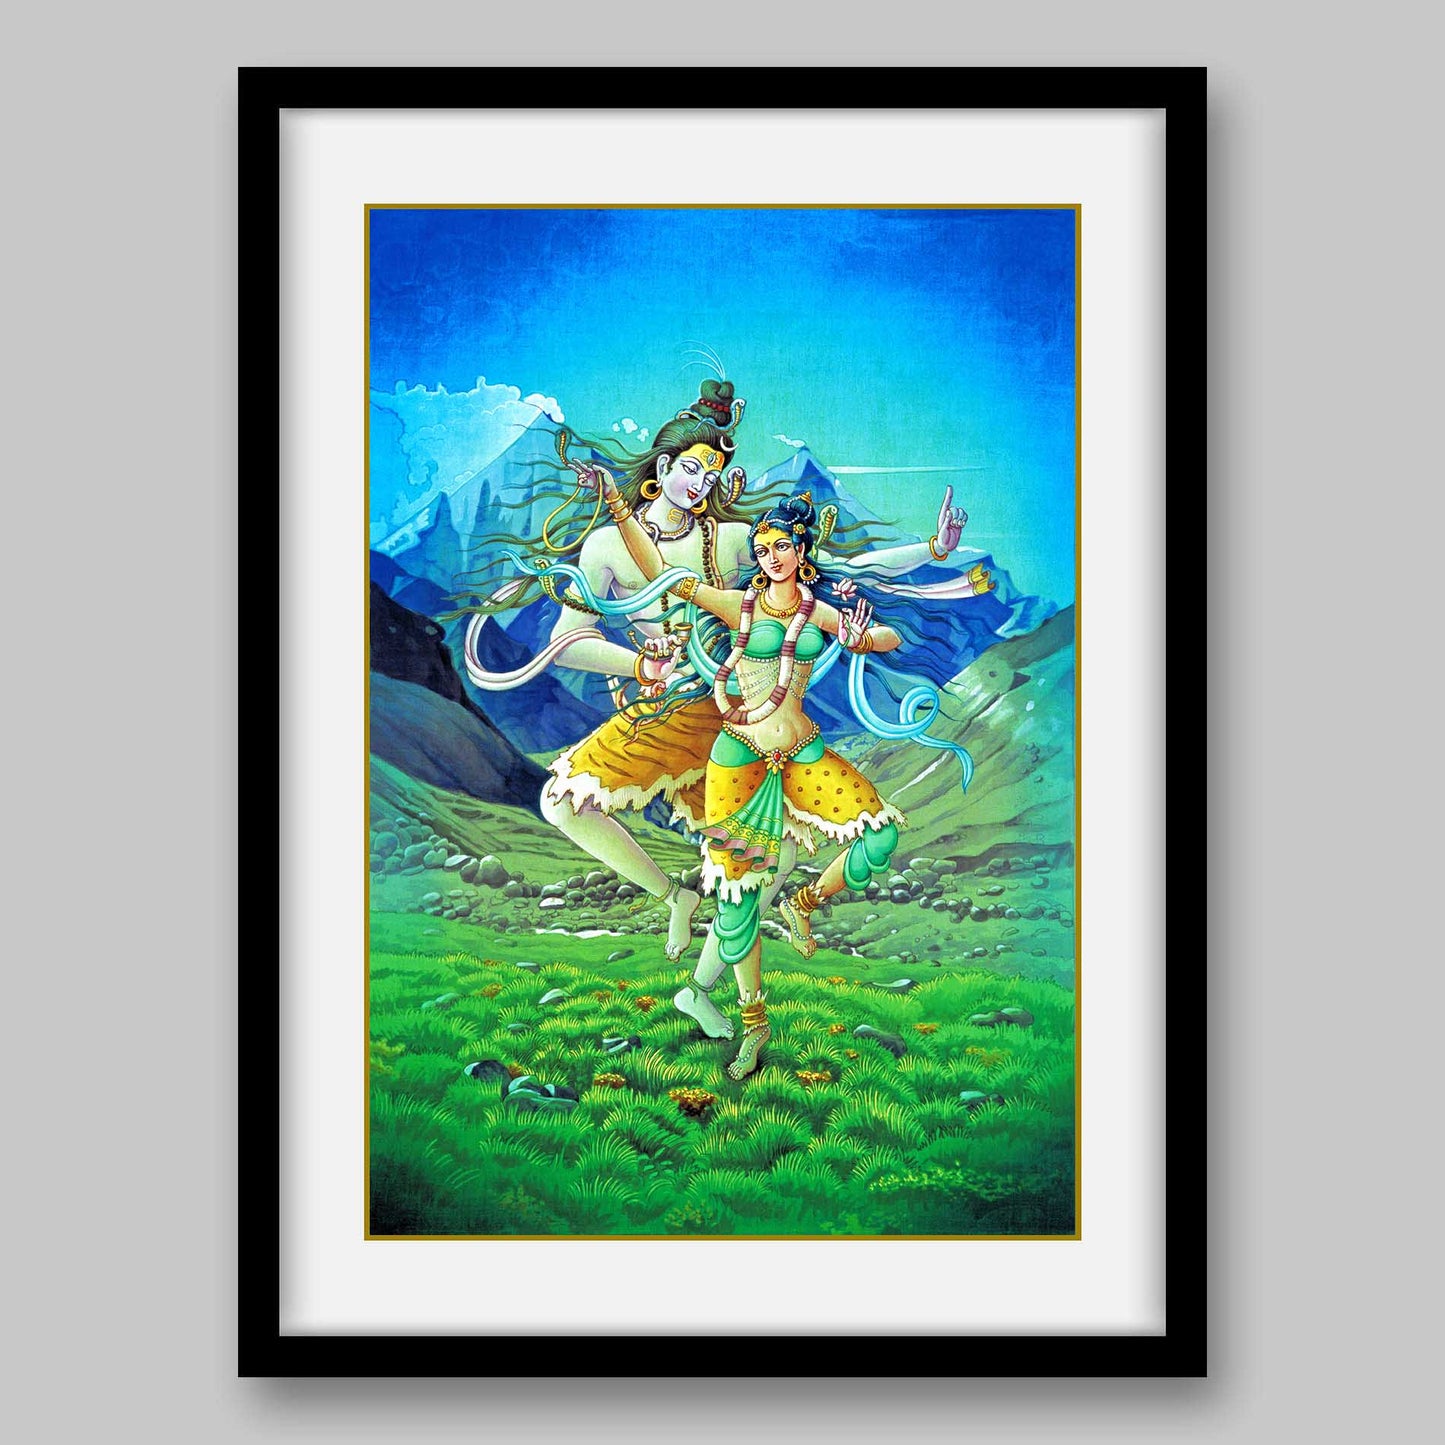 Shiva and Parvati - High Quality Print of Artwork by Pieter Weltevrede